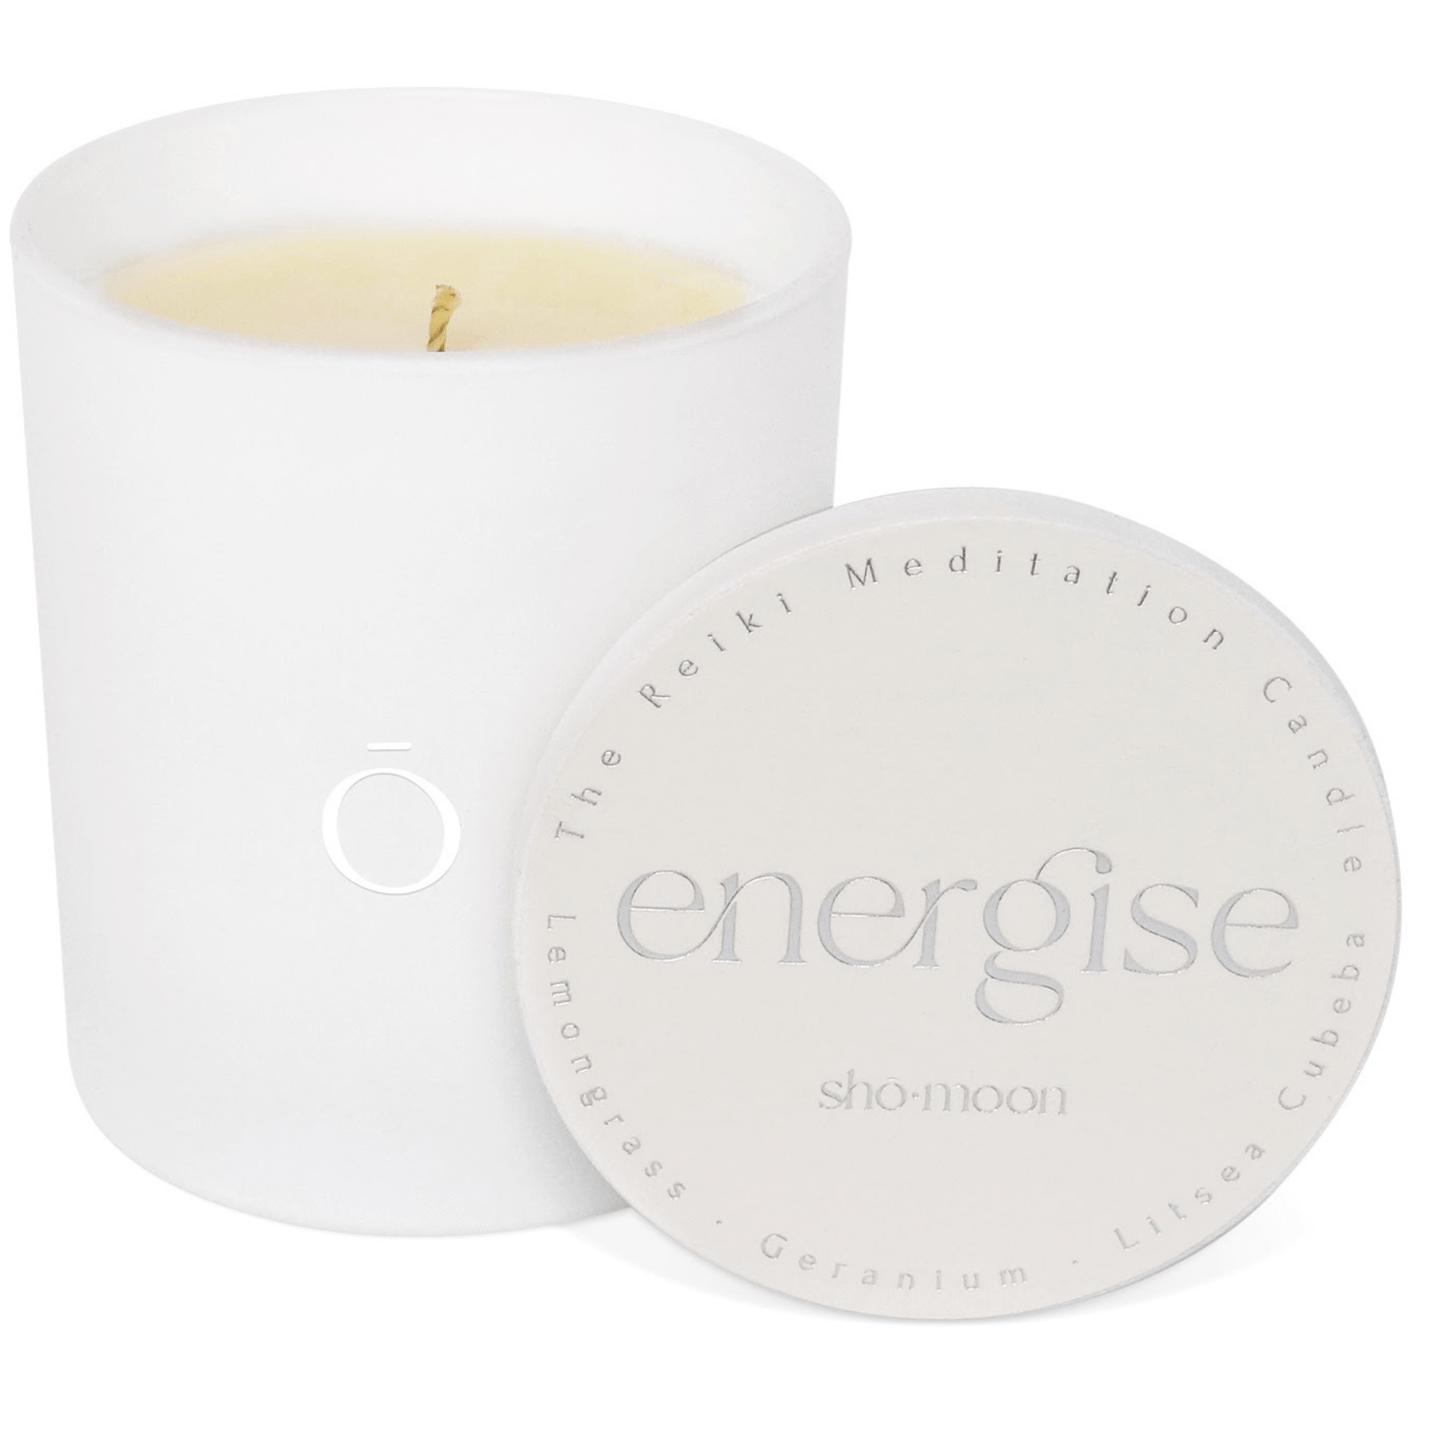 Shō-moon Energise Meditation Candle with pure essentials oils and clean burning and natural wax